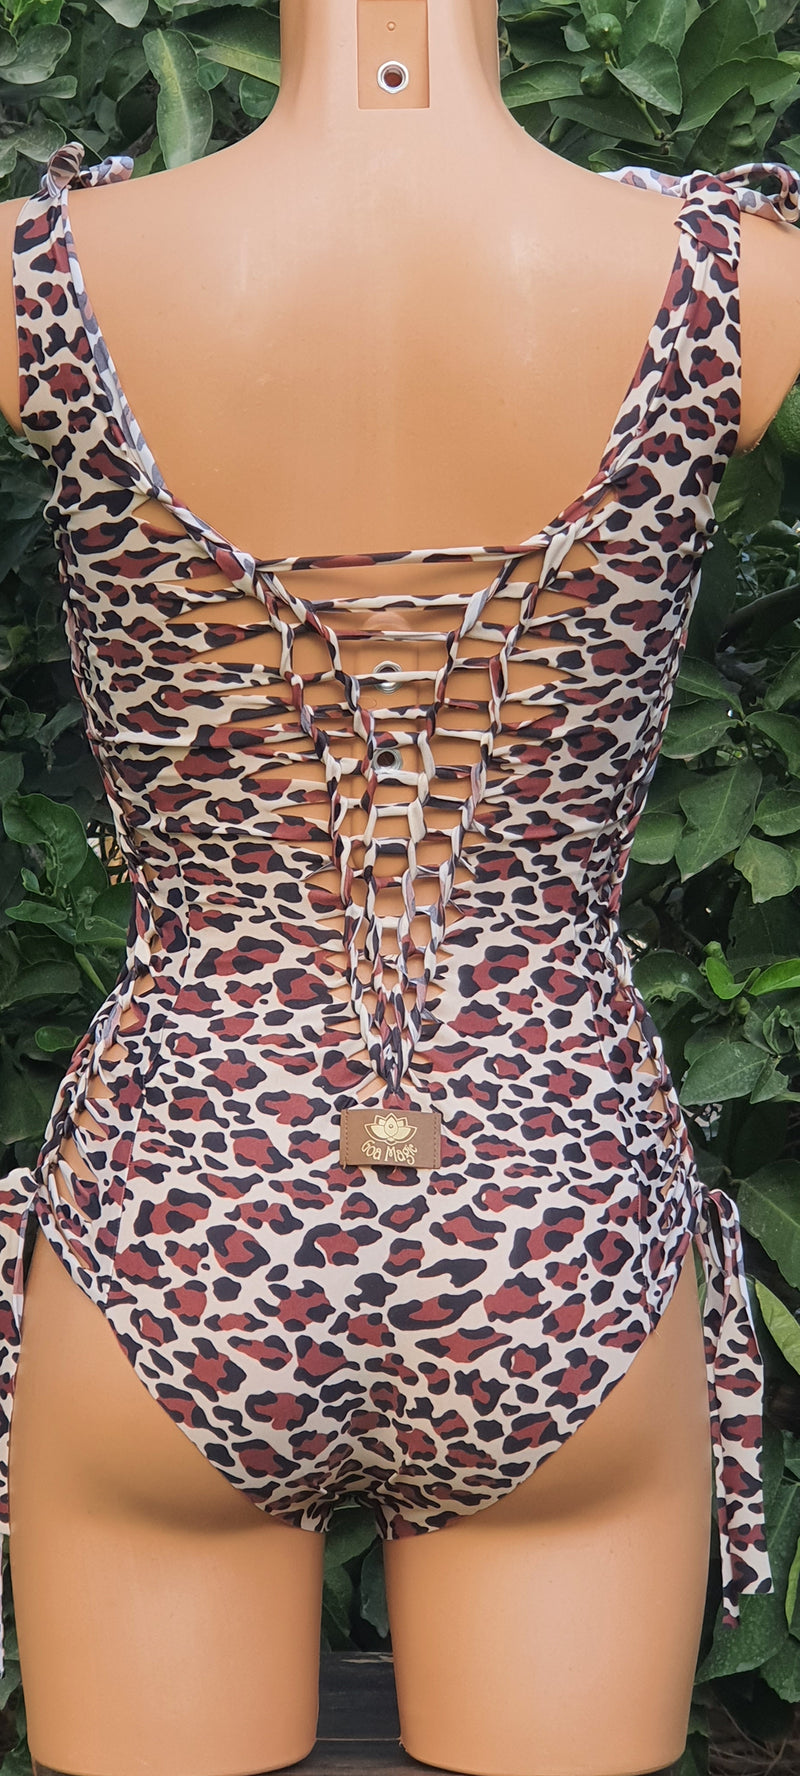 Clearance - One Piece Swimsuit For Women in Leopard print "SIDE" (Lycra Fabric)